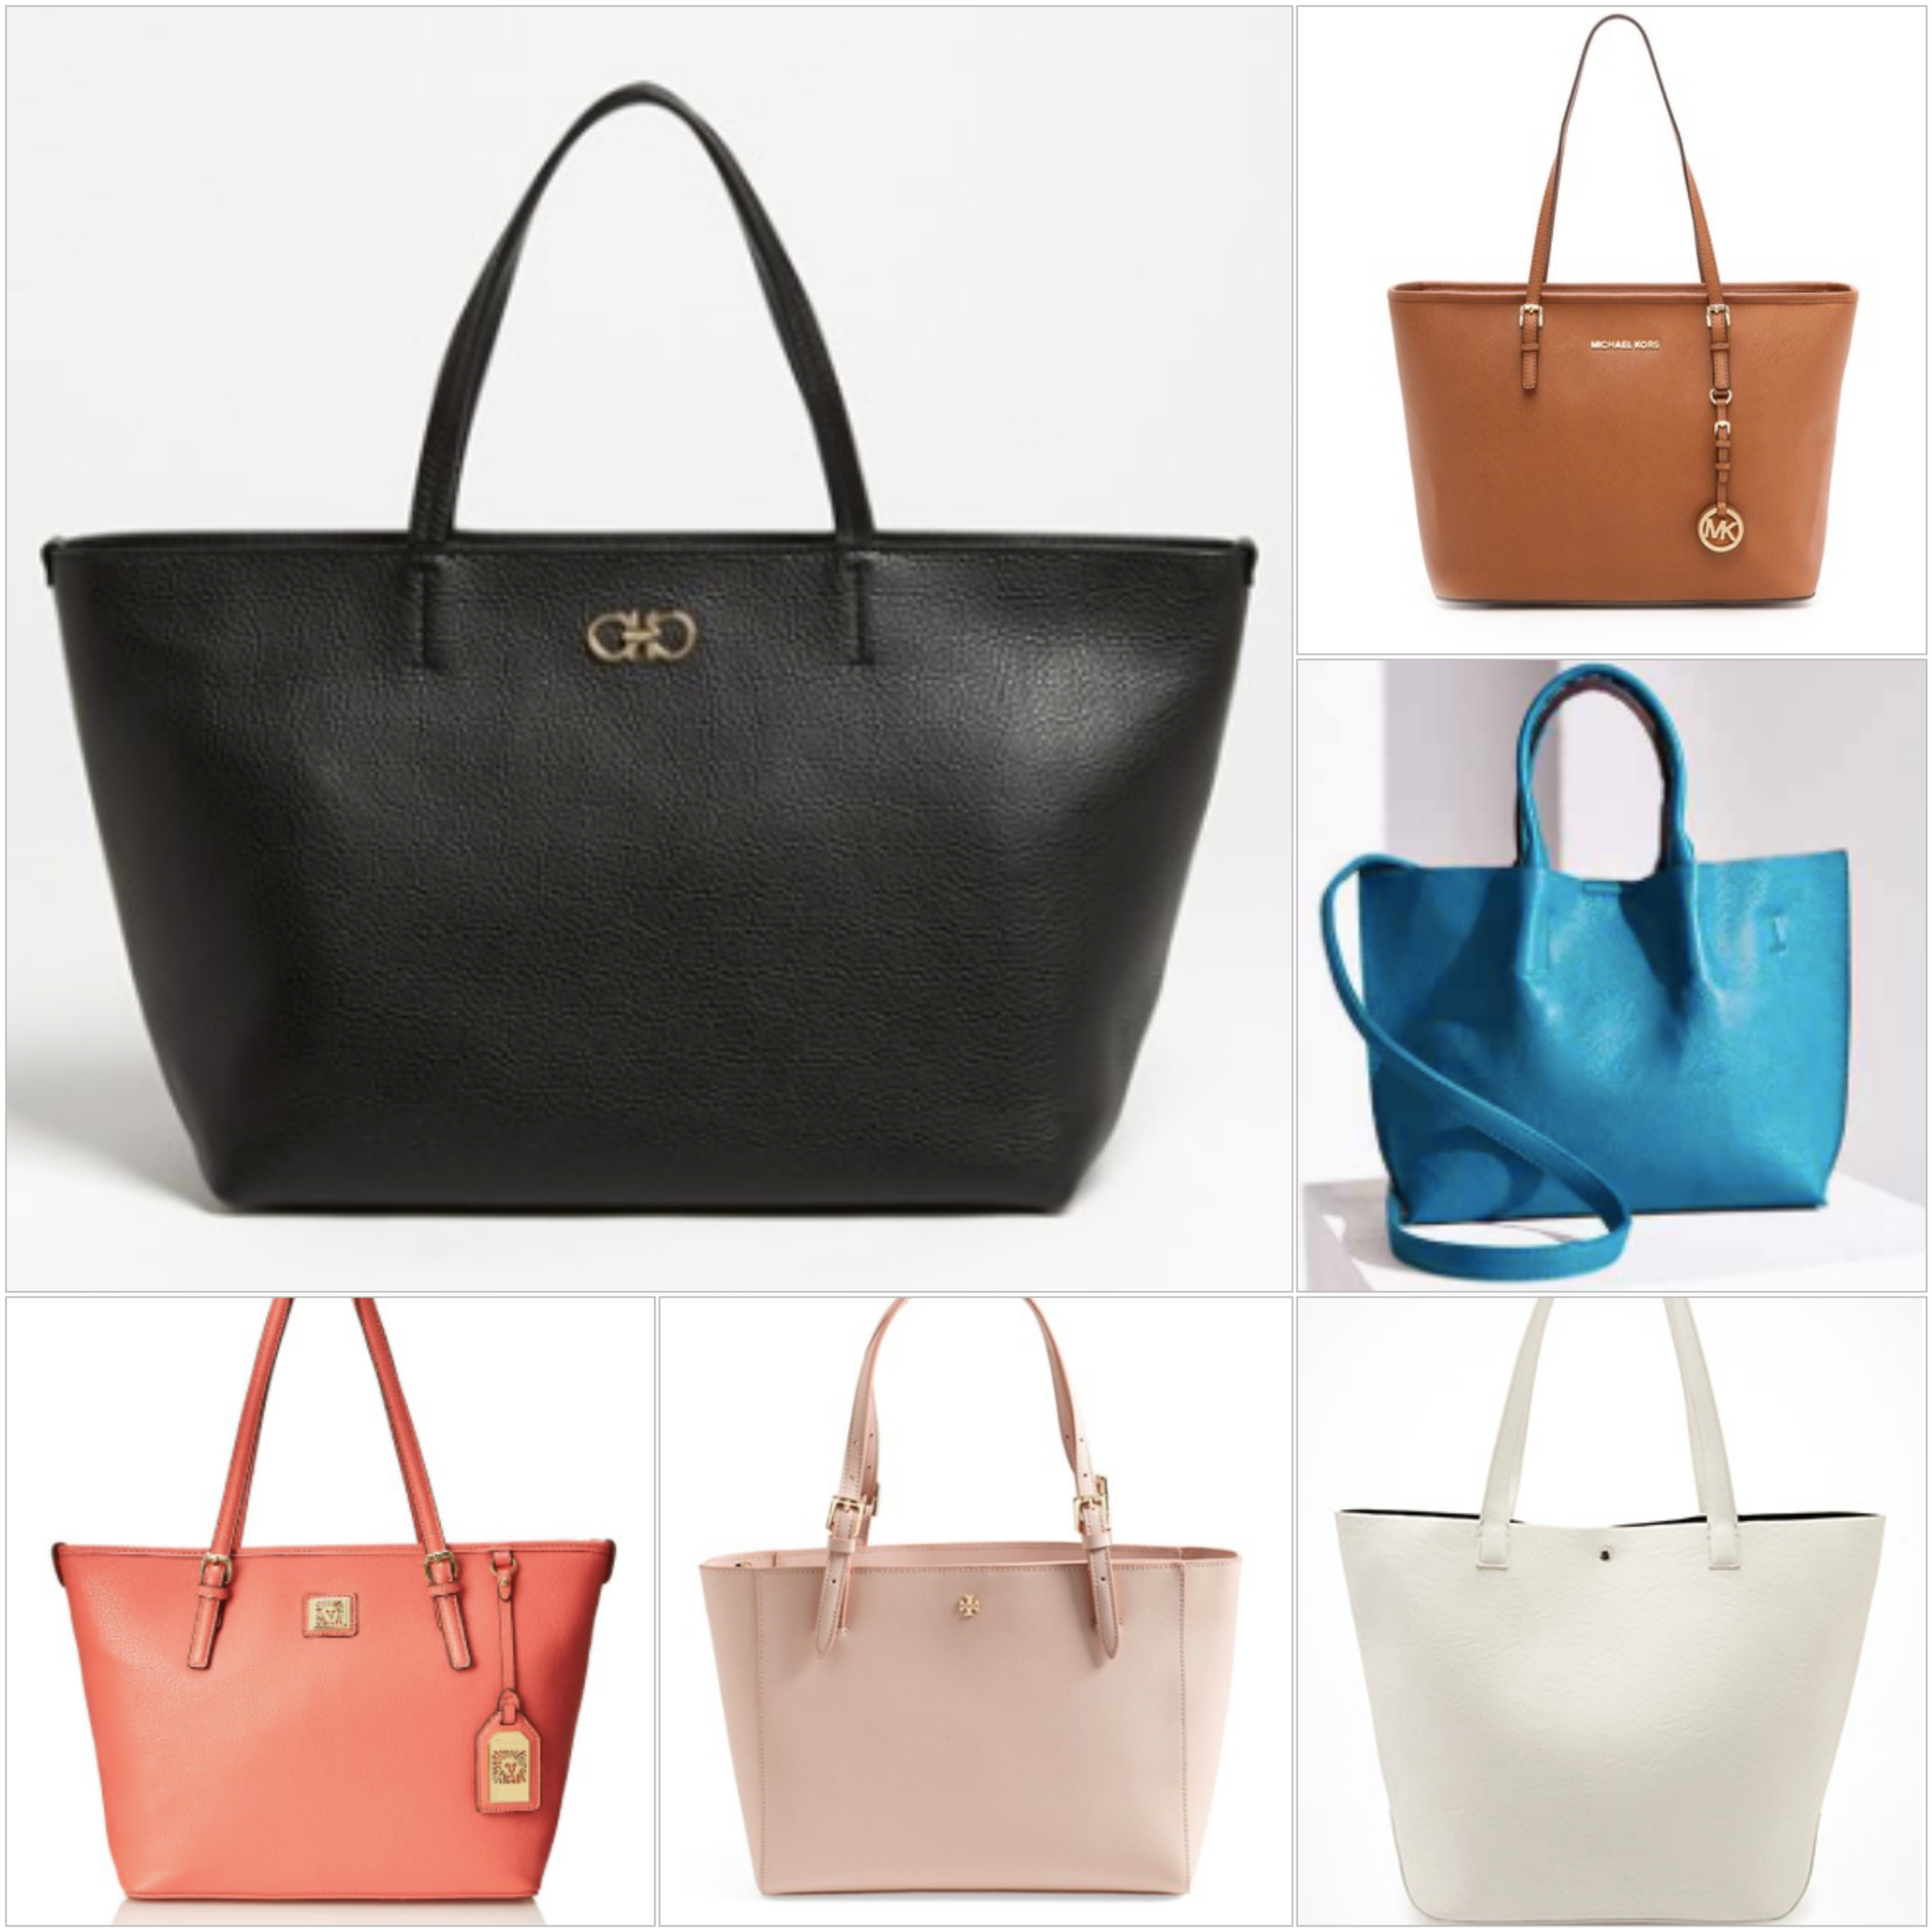 Ought Not To, Ought To: Tote Bags | Truffles and Trends